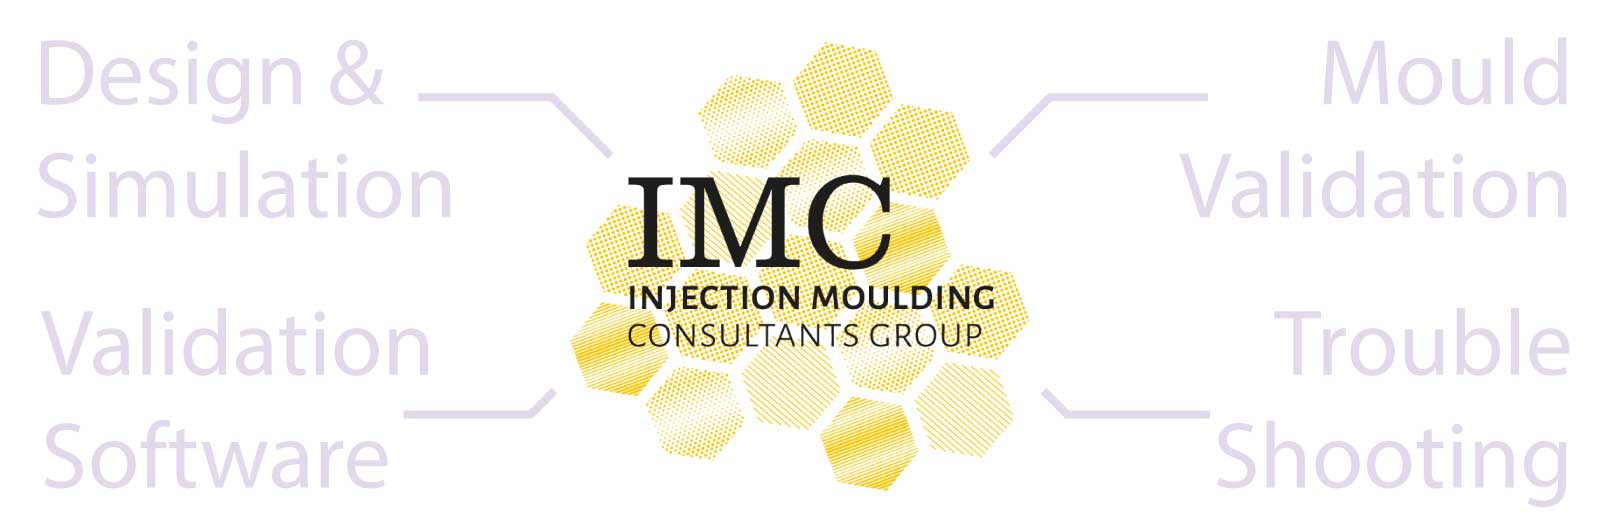 Injection Moulding Consultanats Group